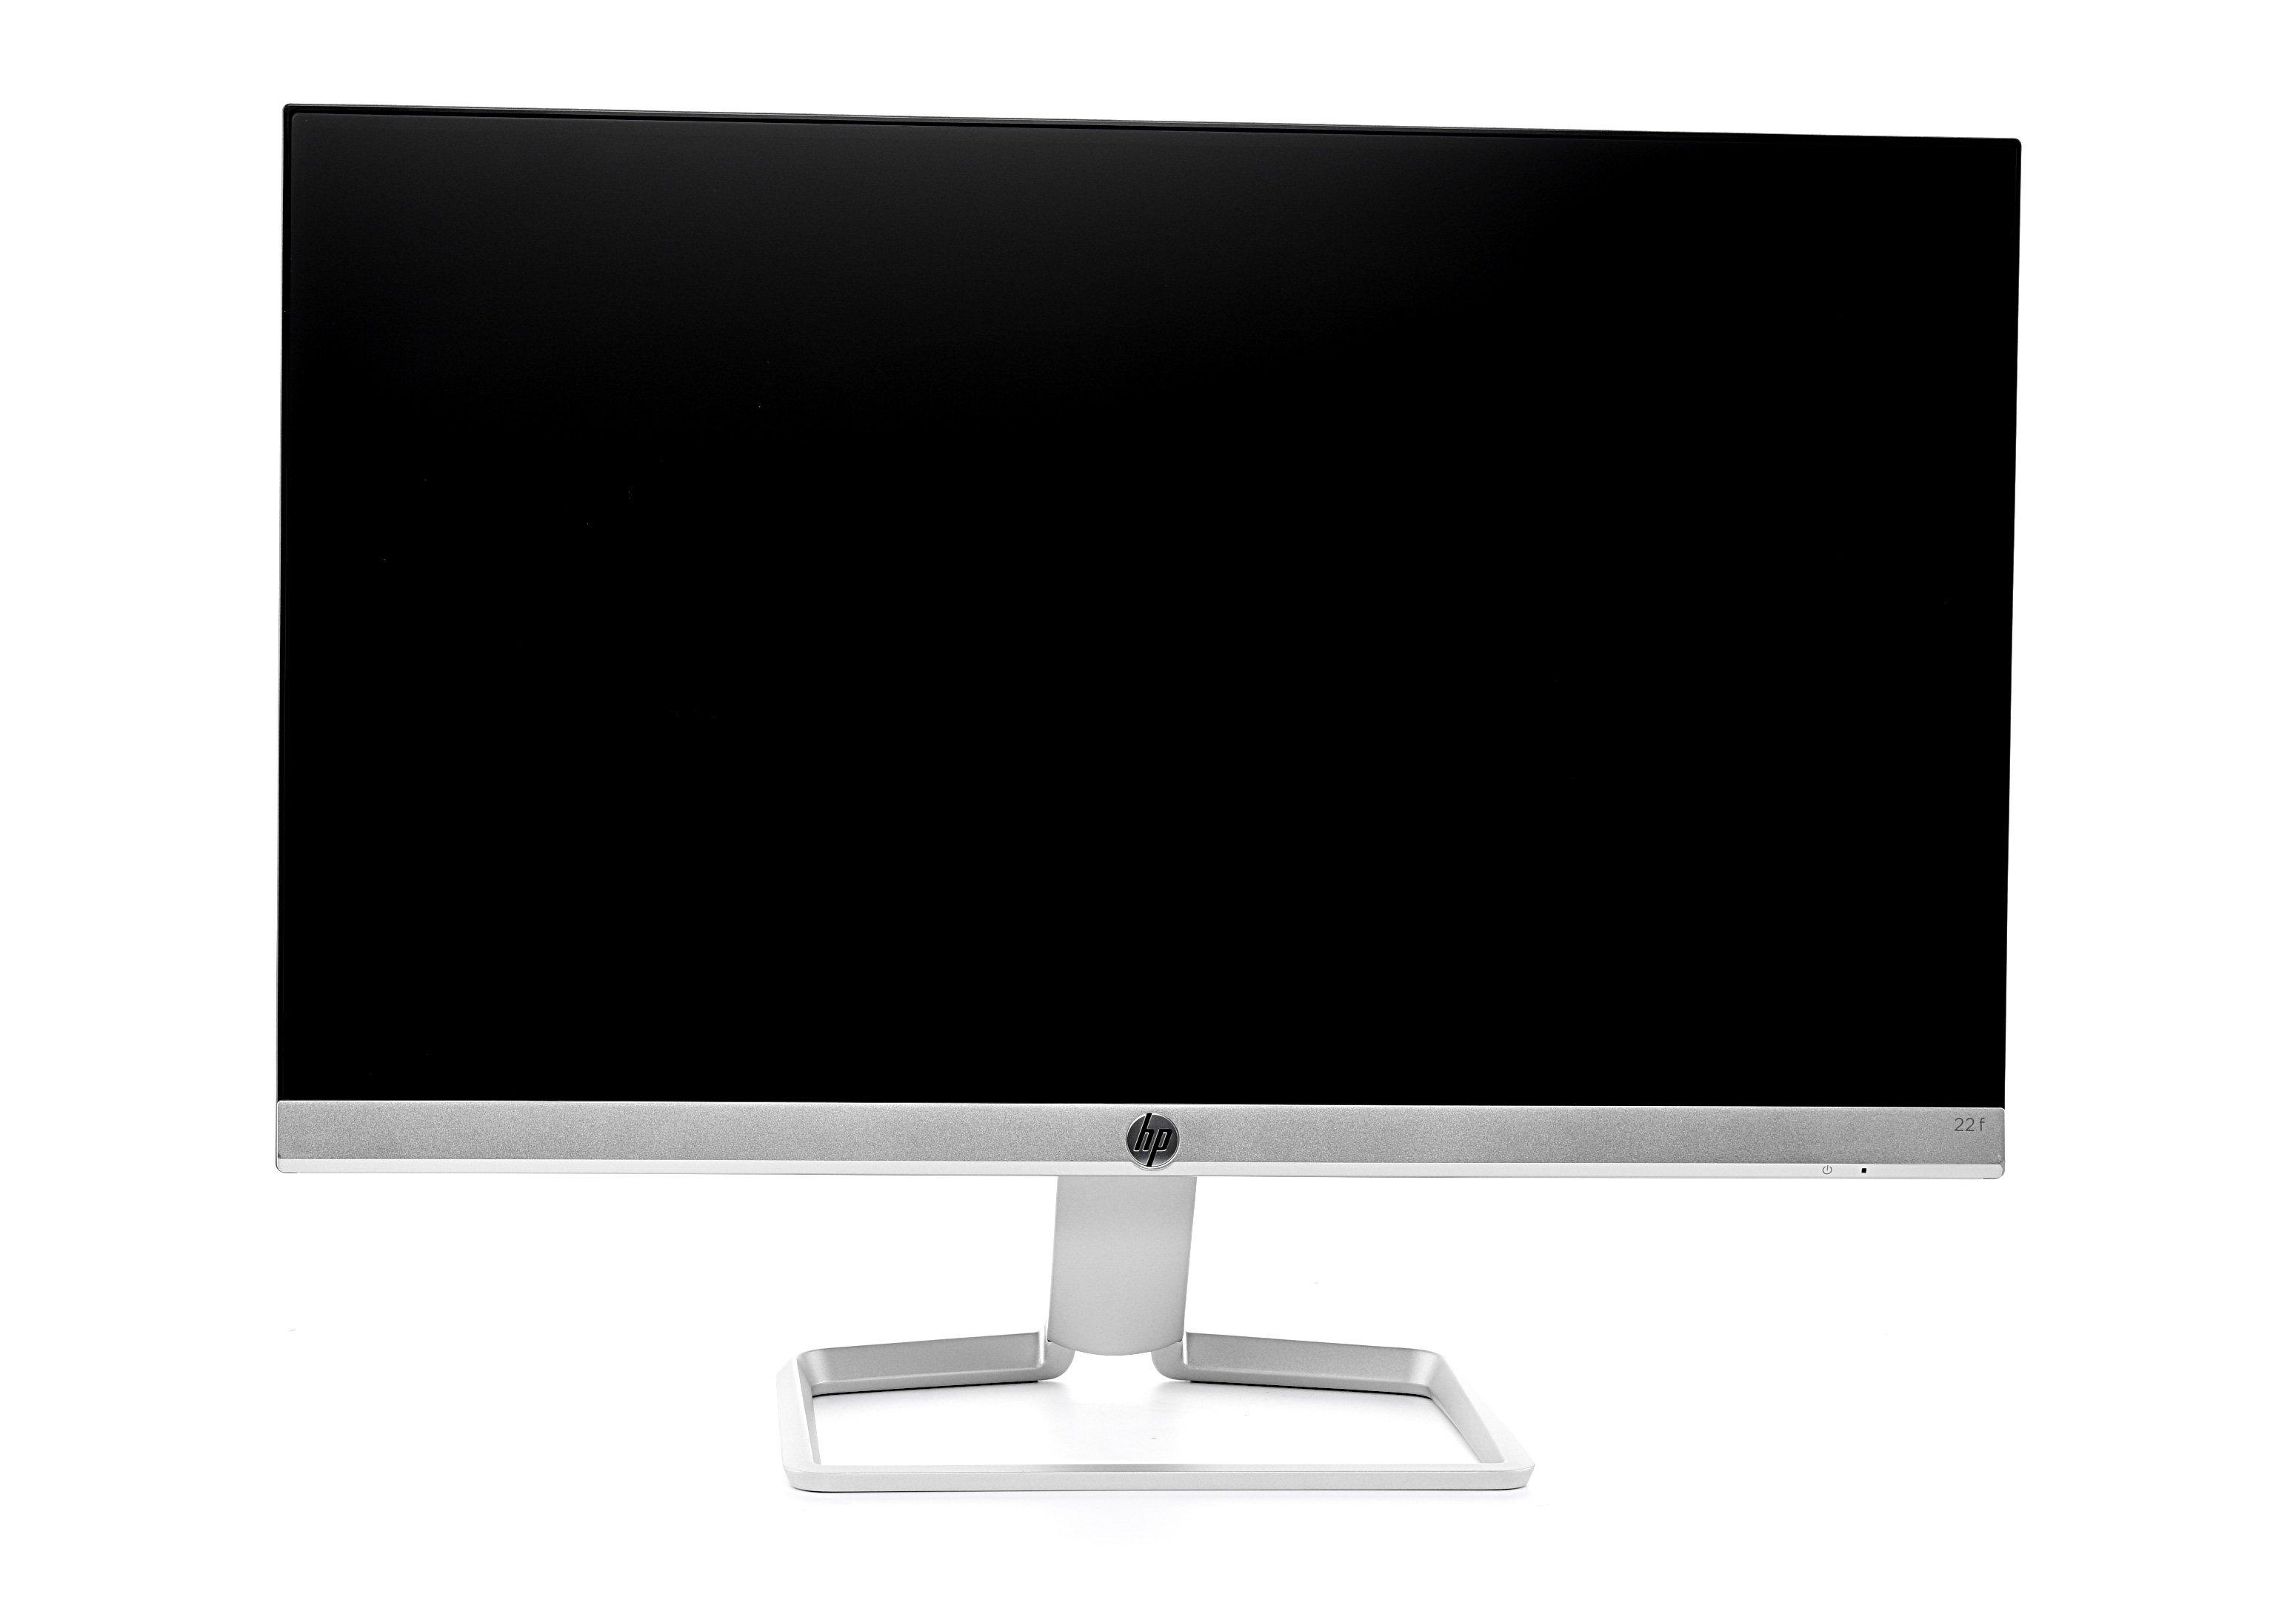 HP 22f FHD Monitor 2XN58AA/AS 21.5 inch, IPS with LED backlight ...